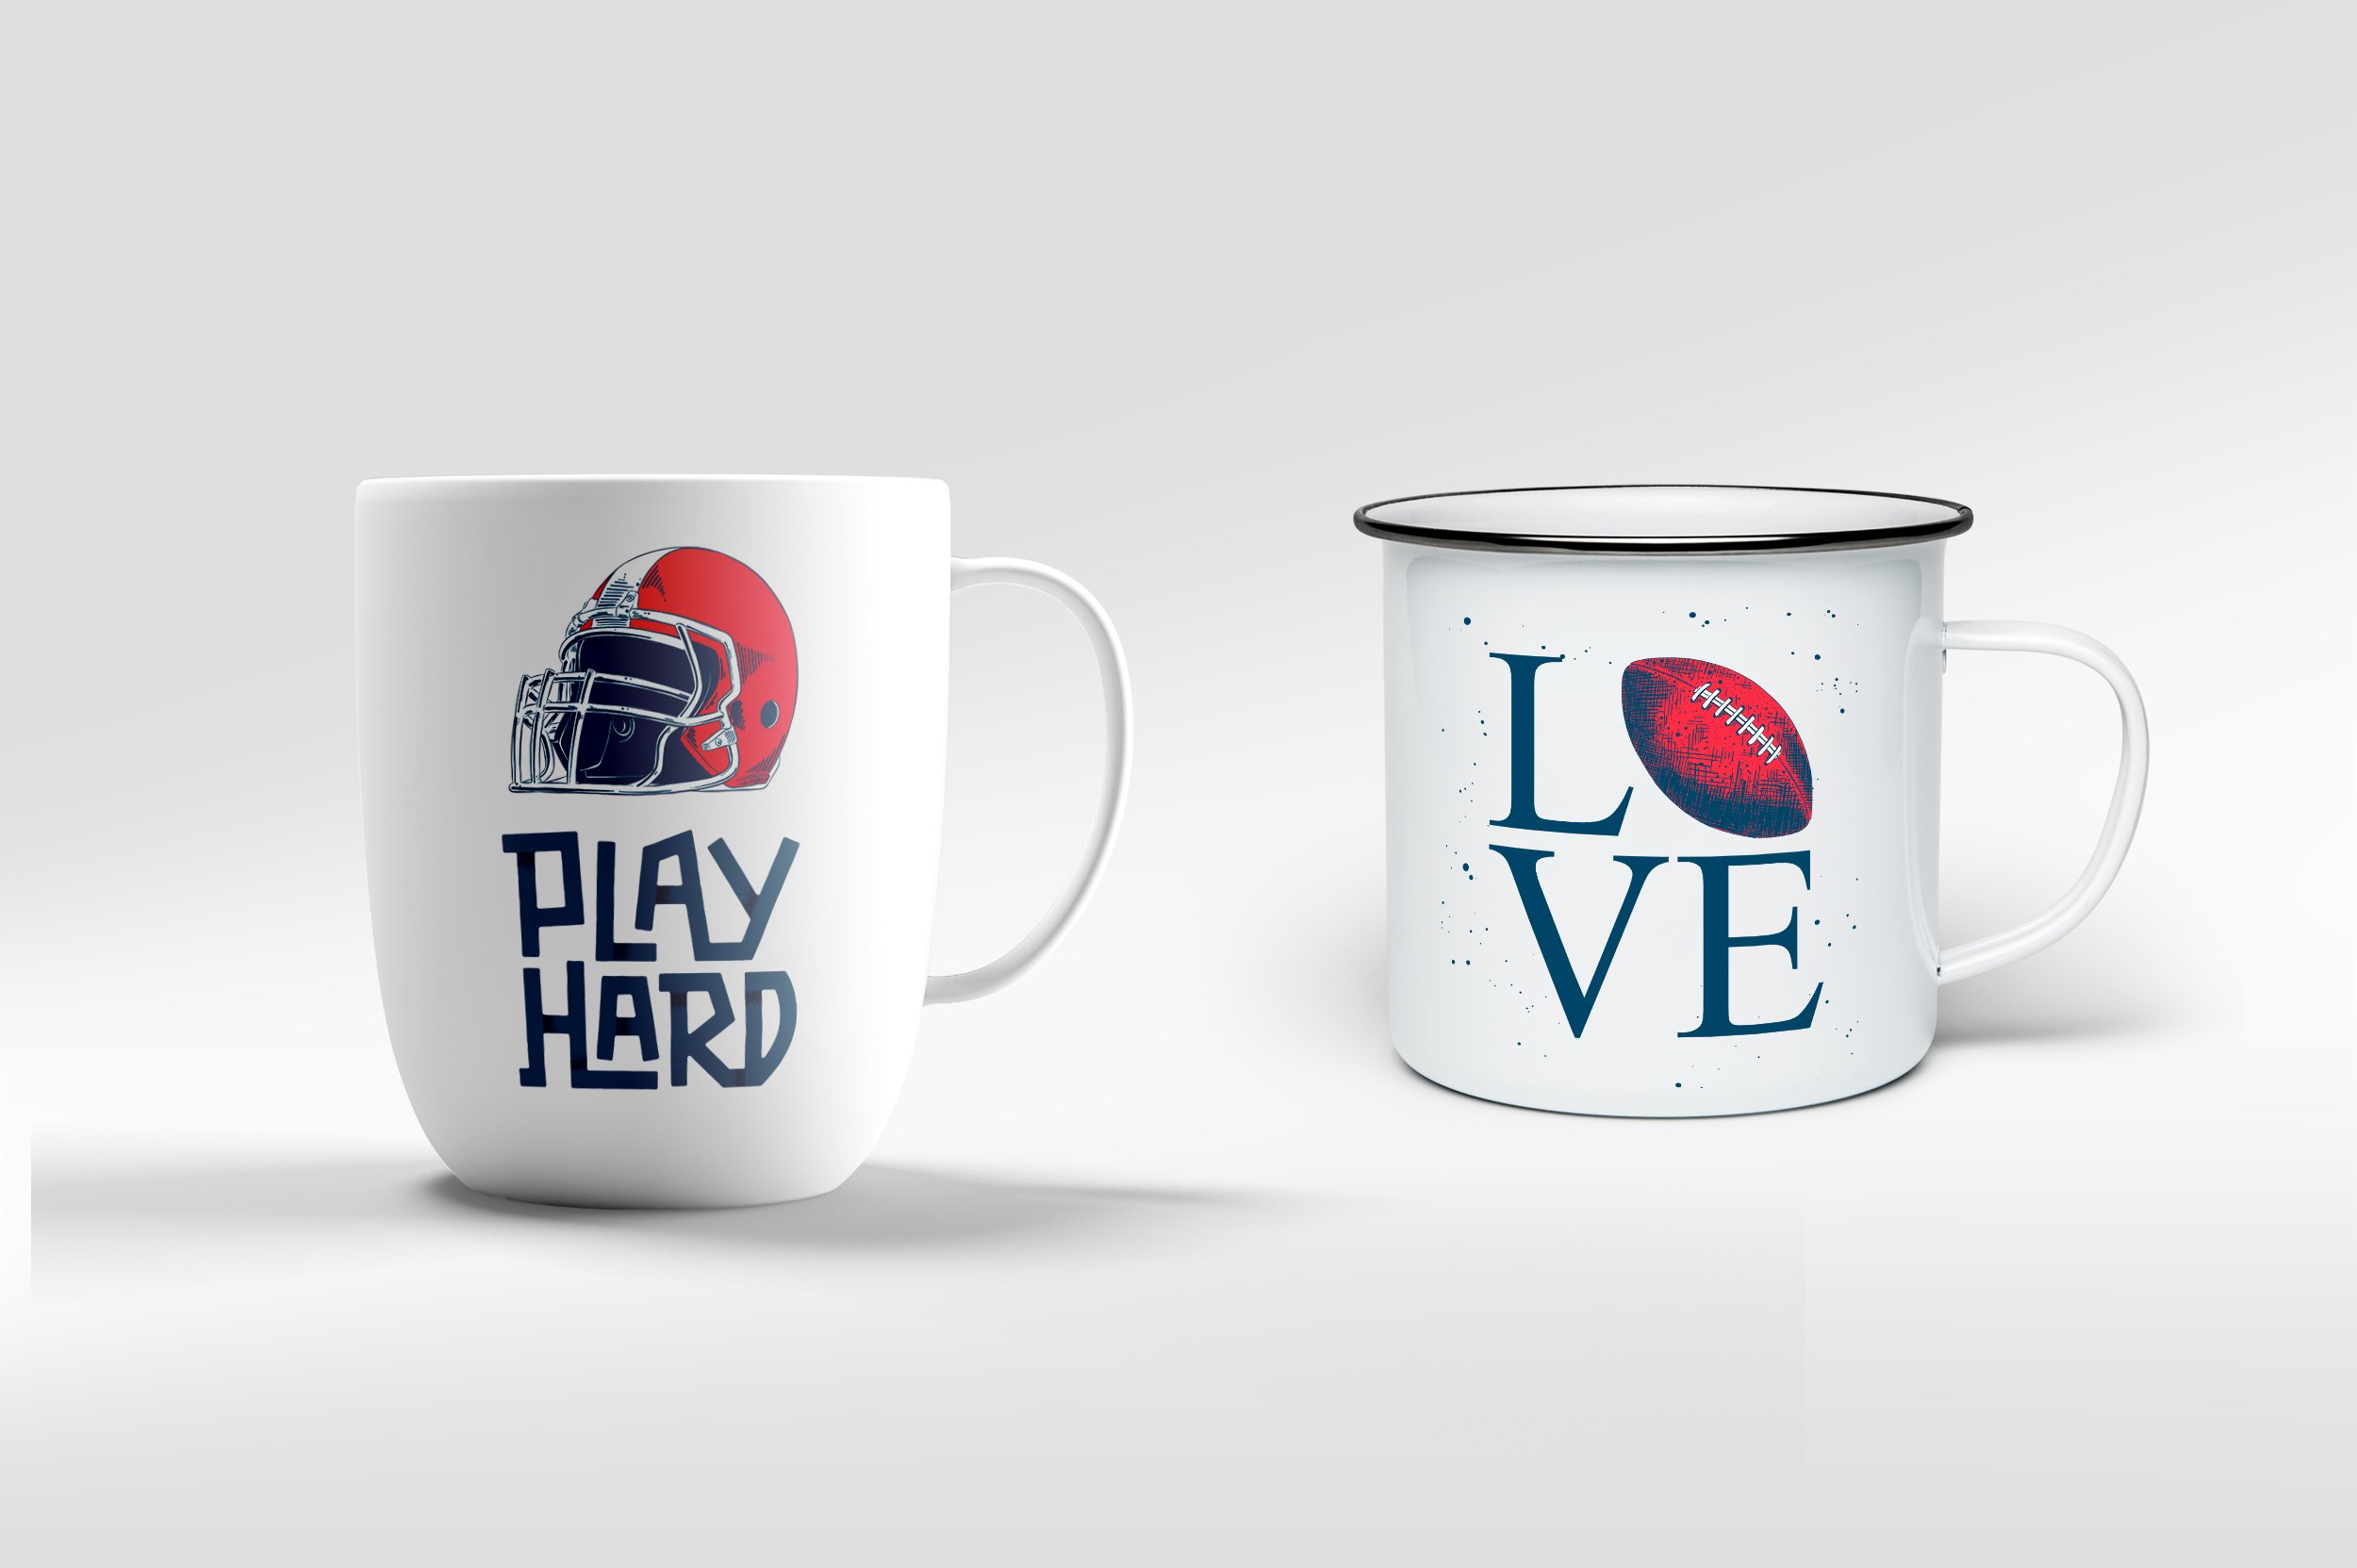 Two coffee mugs one with a football helmet and the other with love.